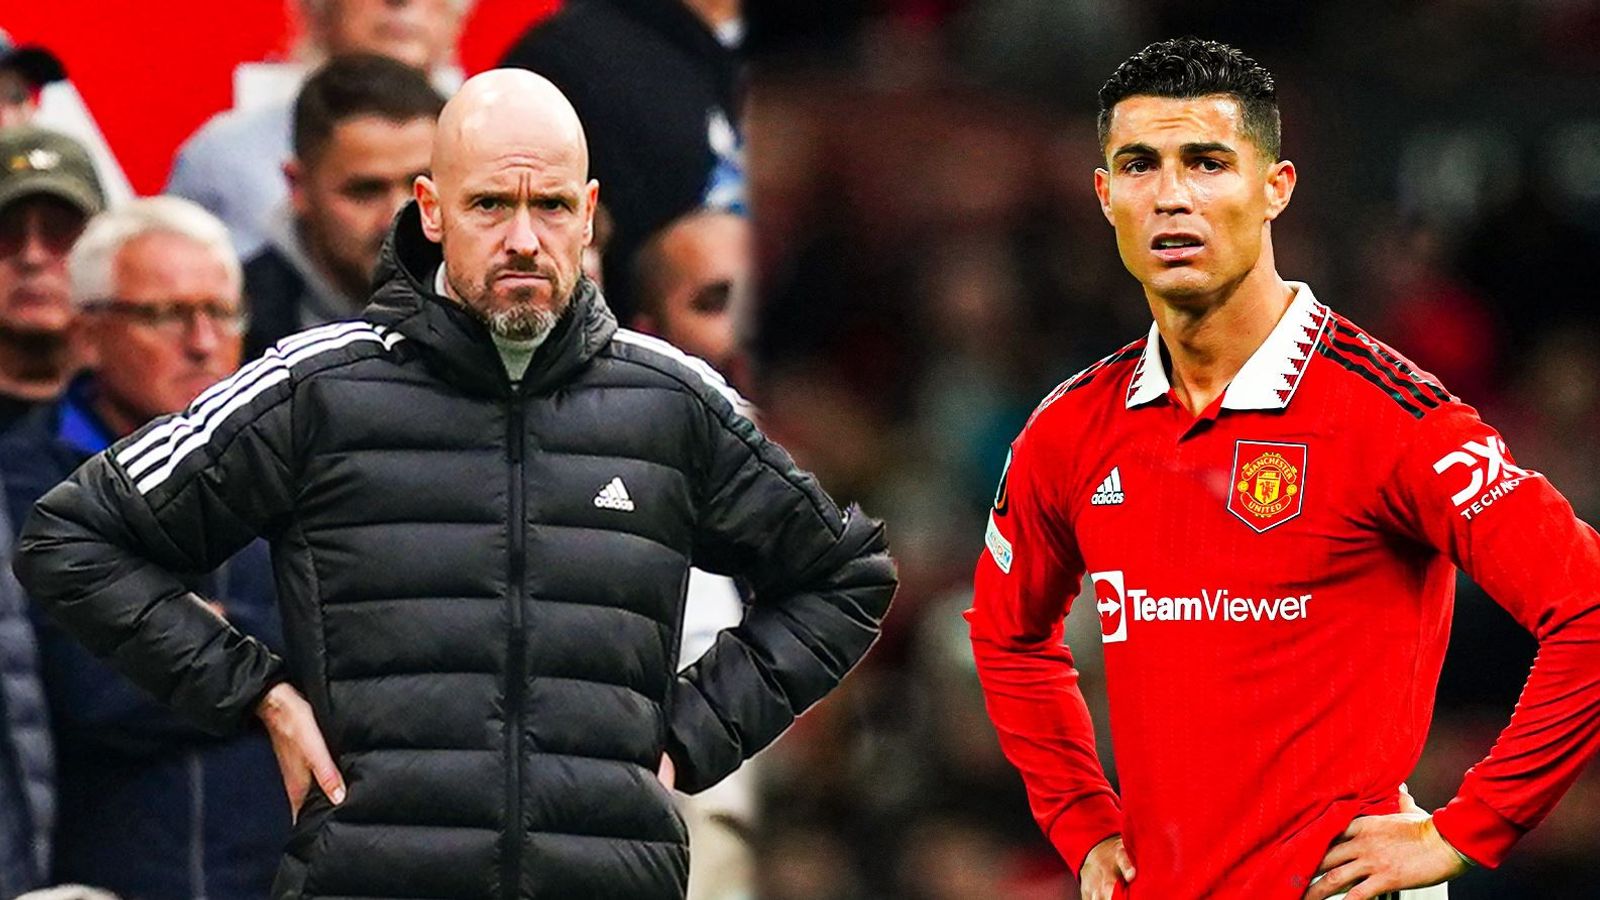 Cristiano Ronaldo REFUSED to play for Manchester United against Tottenham  confirms Erik ten Hag - and hardline boss warned superstar rebel he would  face consequences as he trains alone